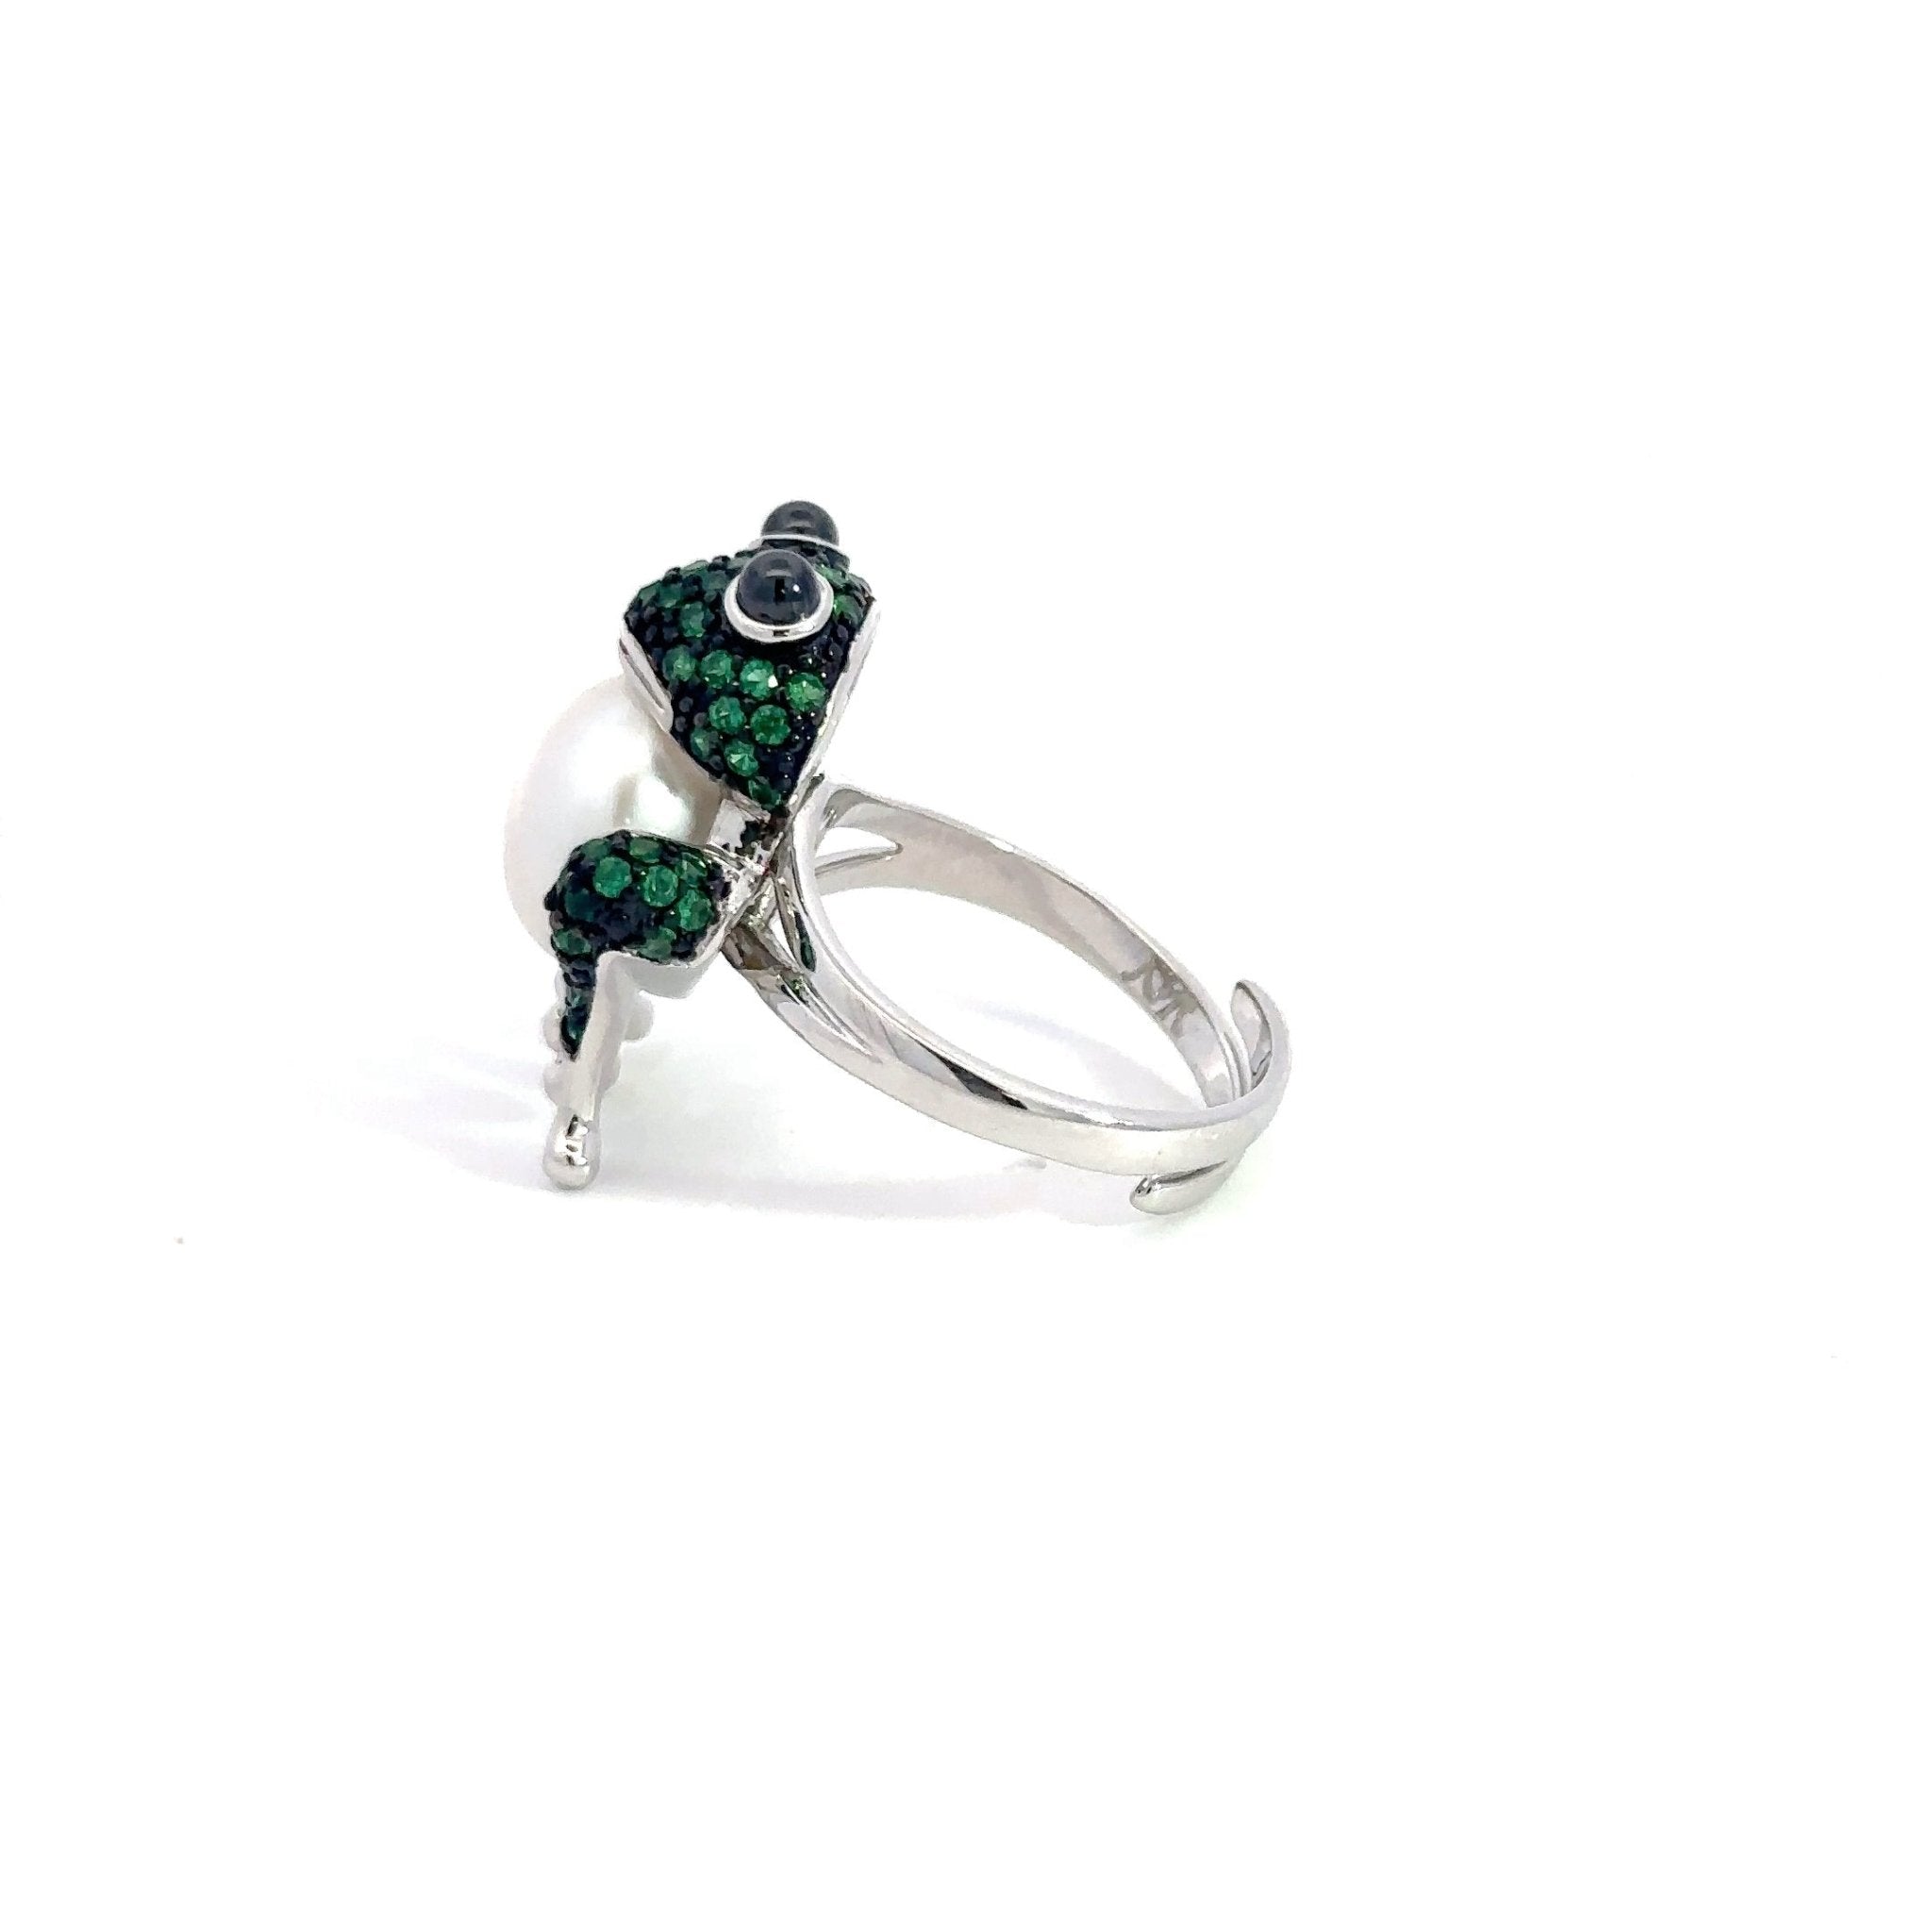 Green & Pearl Silver Frog Ring by Natkina